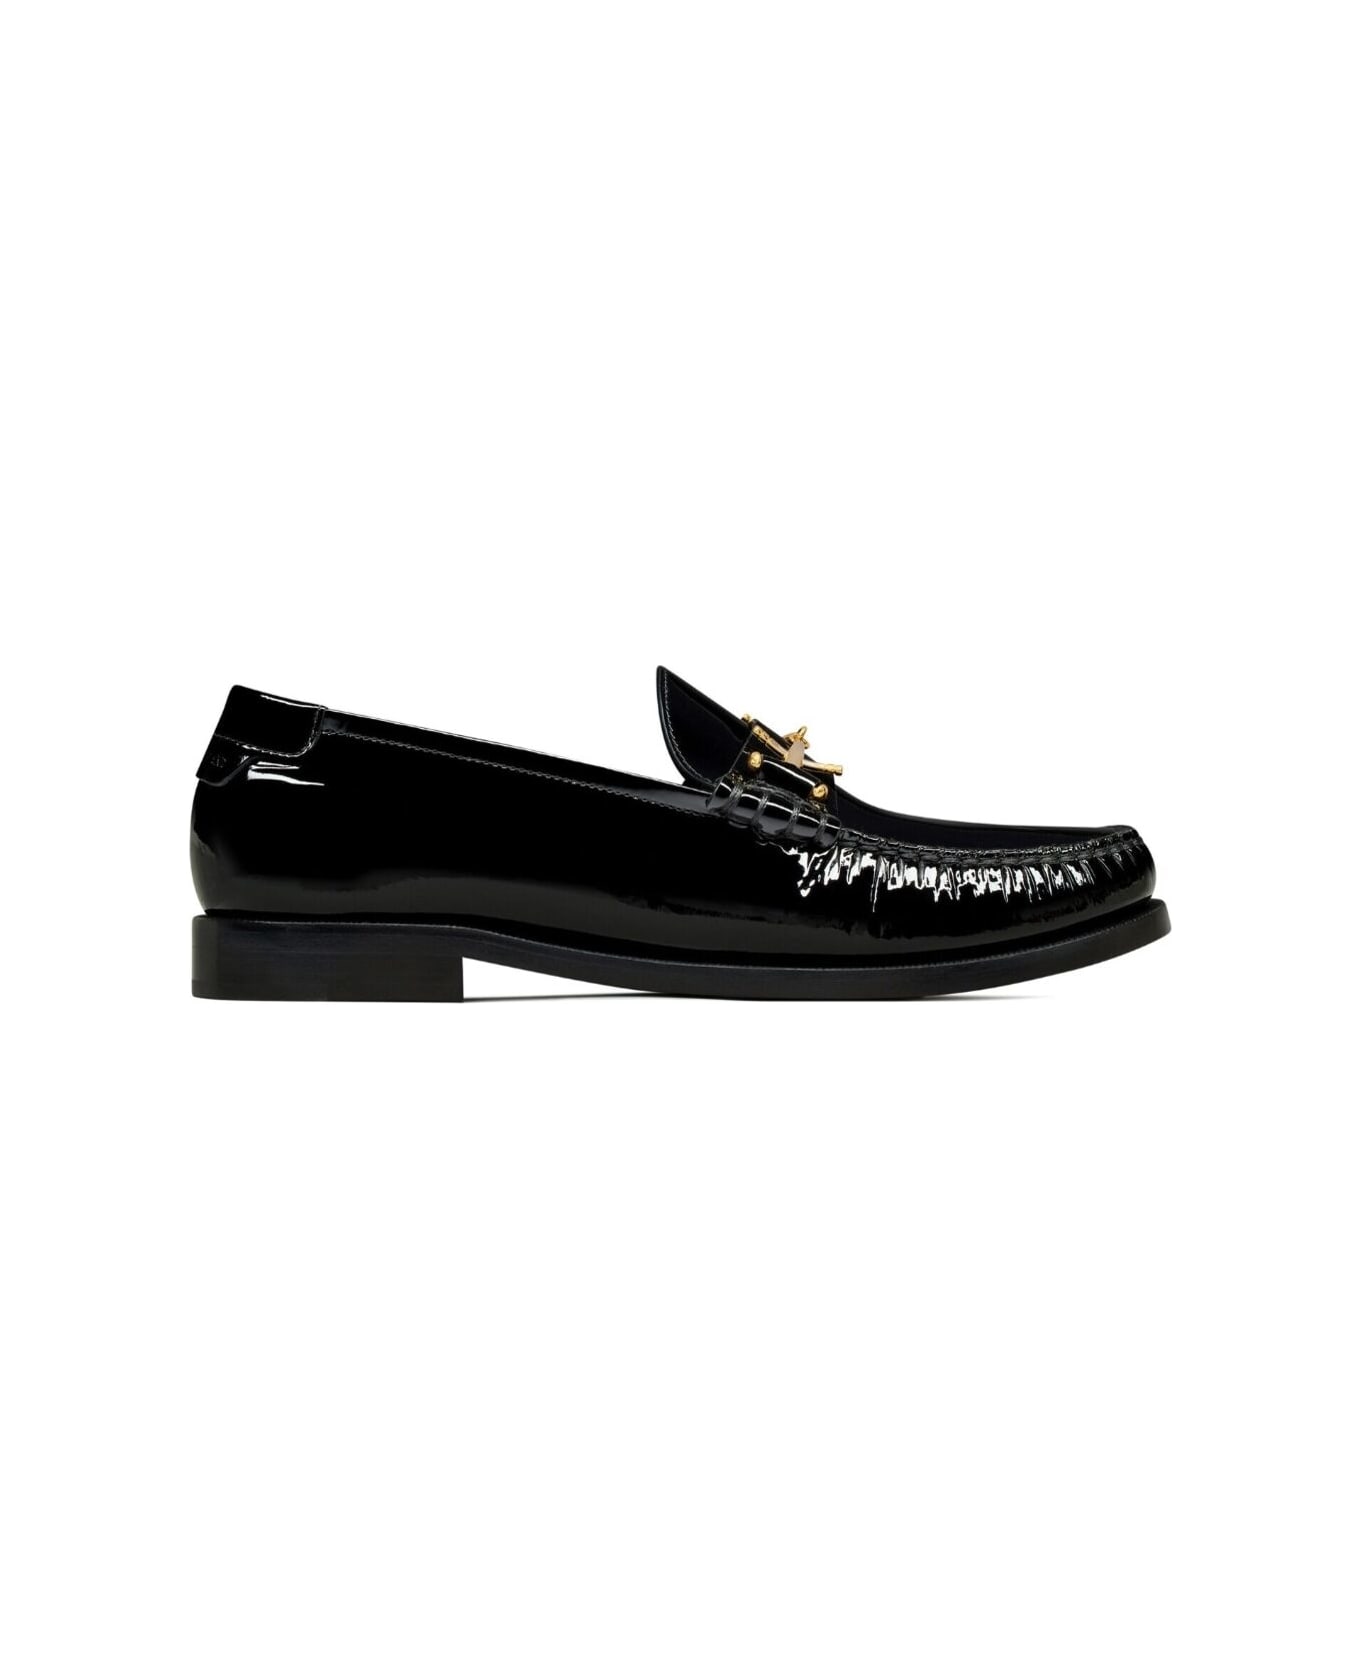 Saint Laurent Le Loafer Penny Slippers In Black Patent Leather Woman - Black